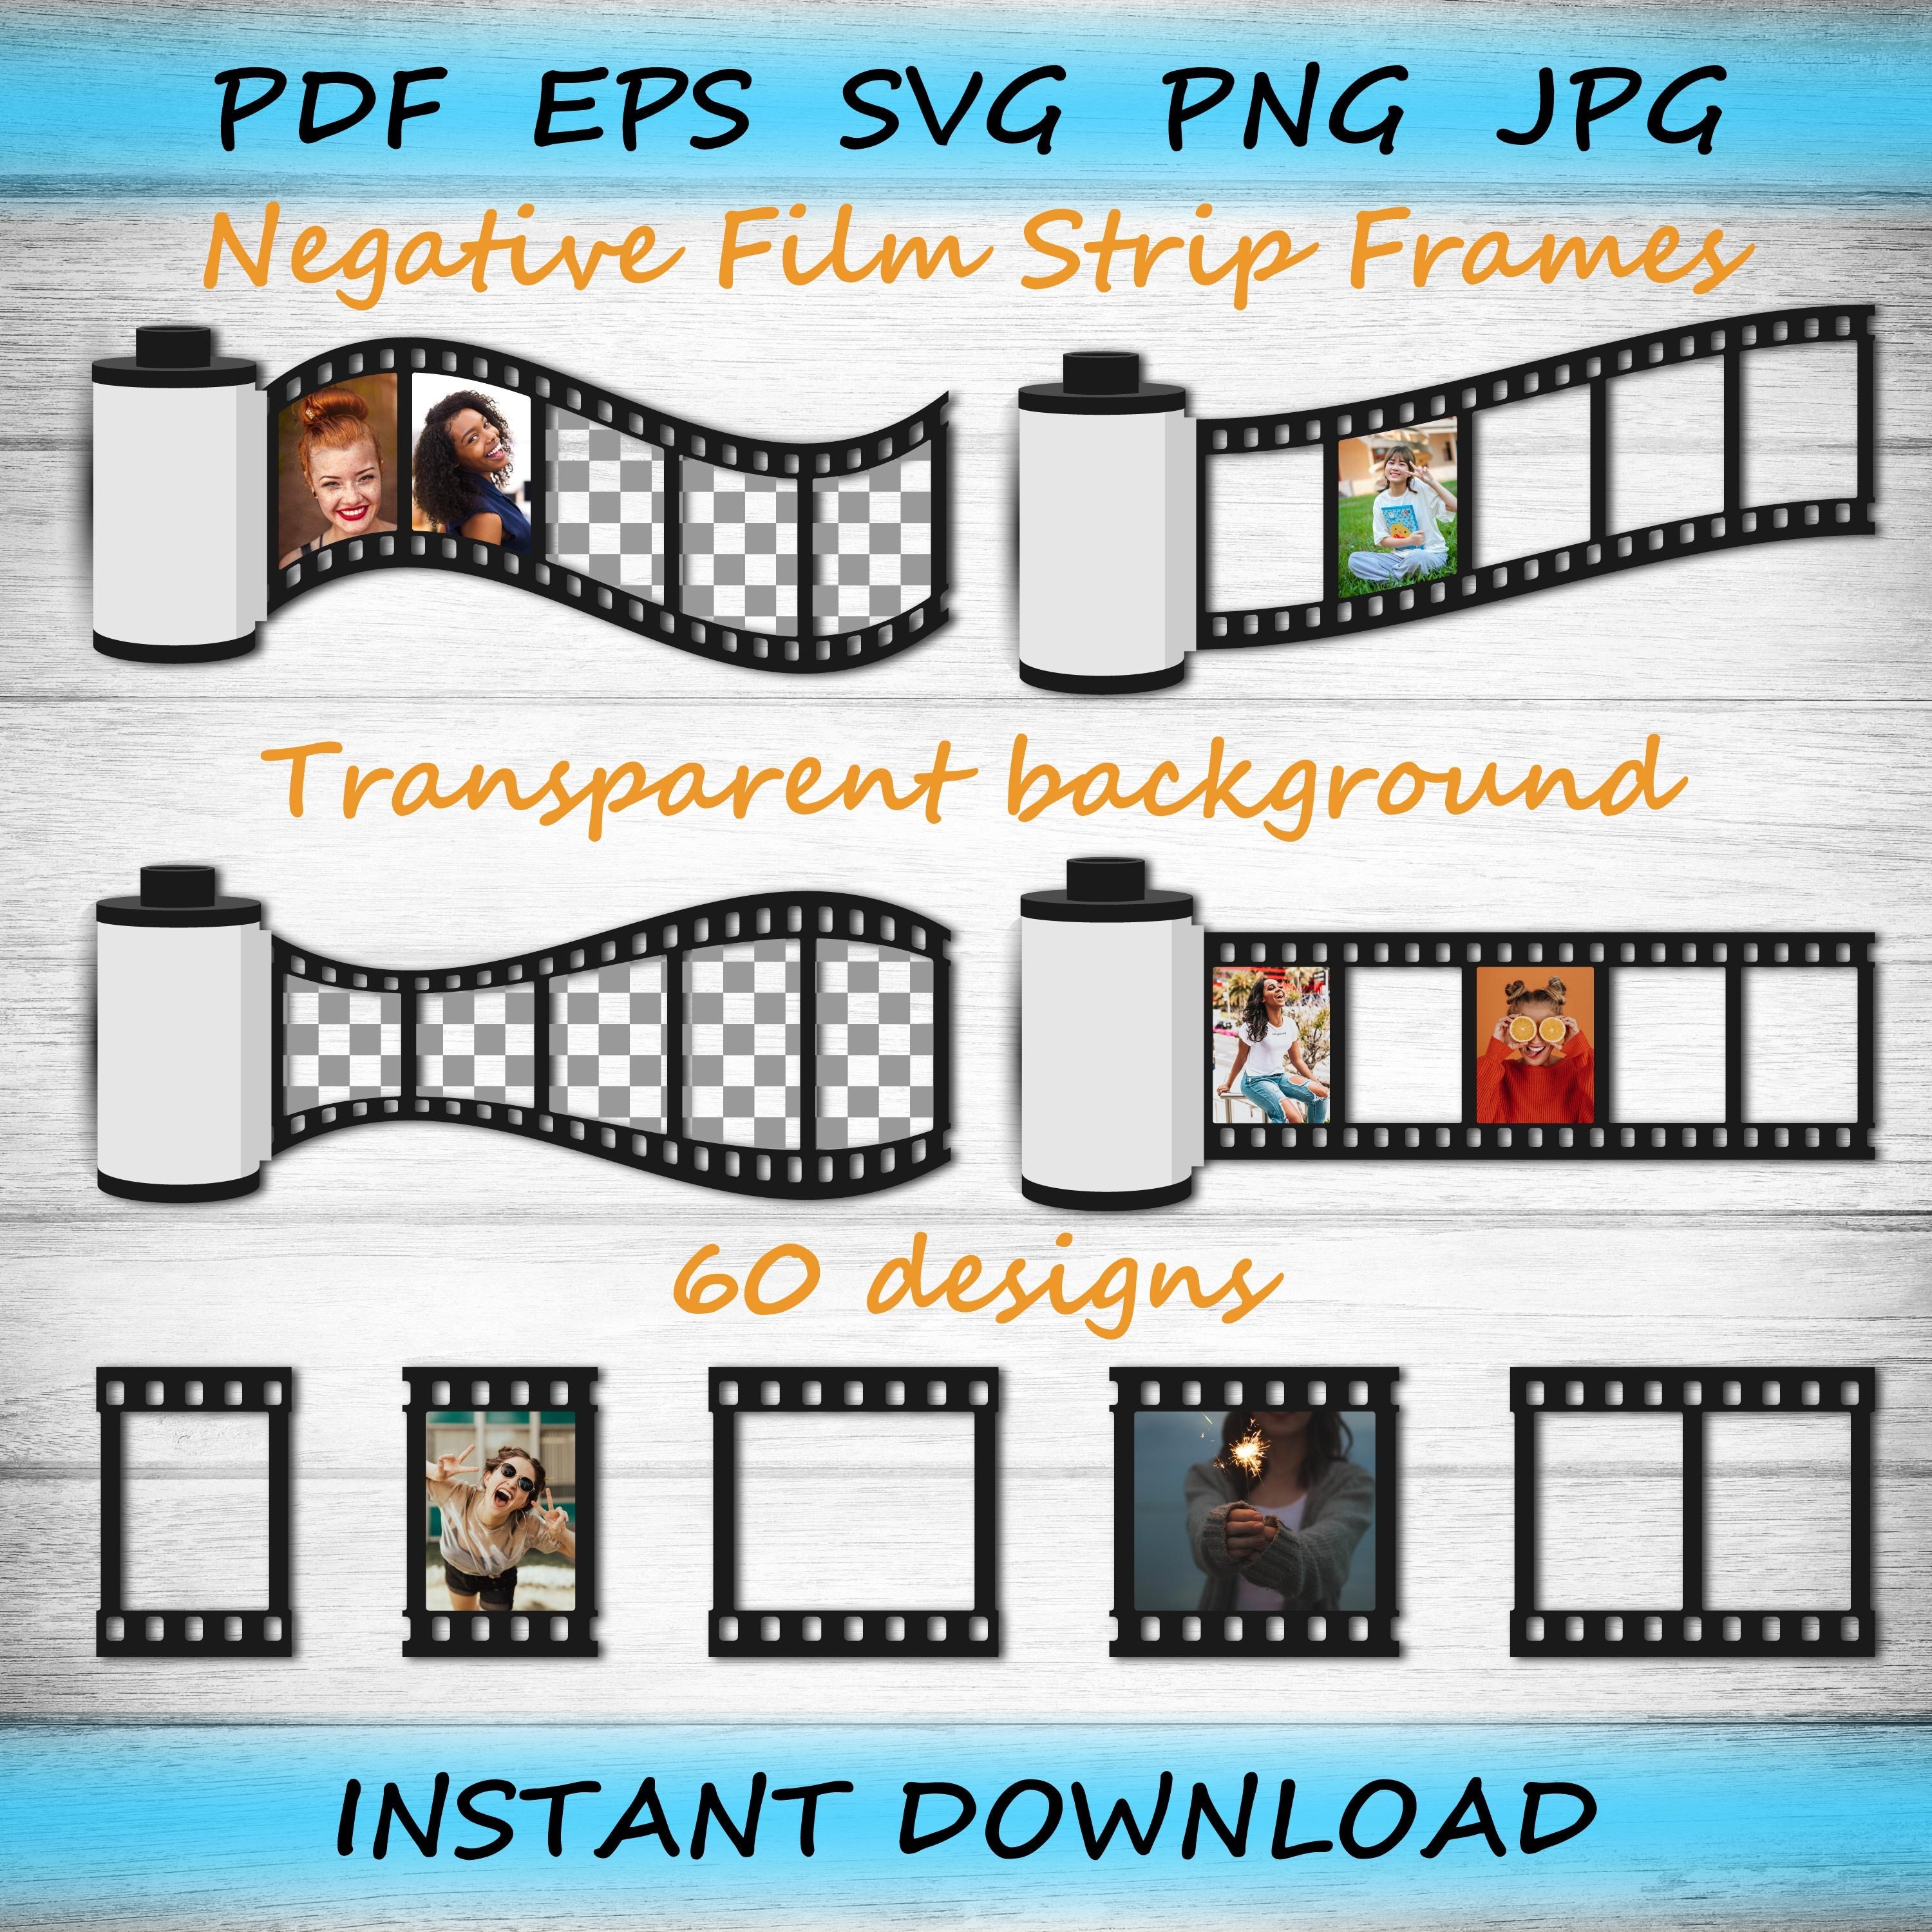 Negative Film Strip Frames Add a Vintage Touch to Your Photos With 60  Unique Digital Frames in 5 Formats, Pdf Eps Svg Png Jpg 